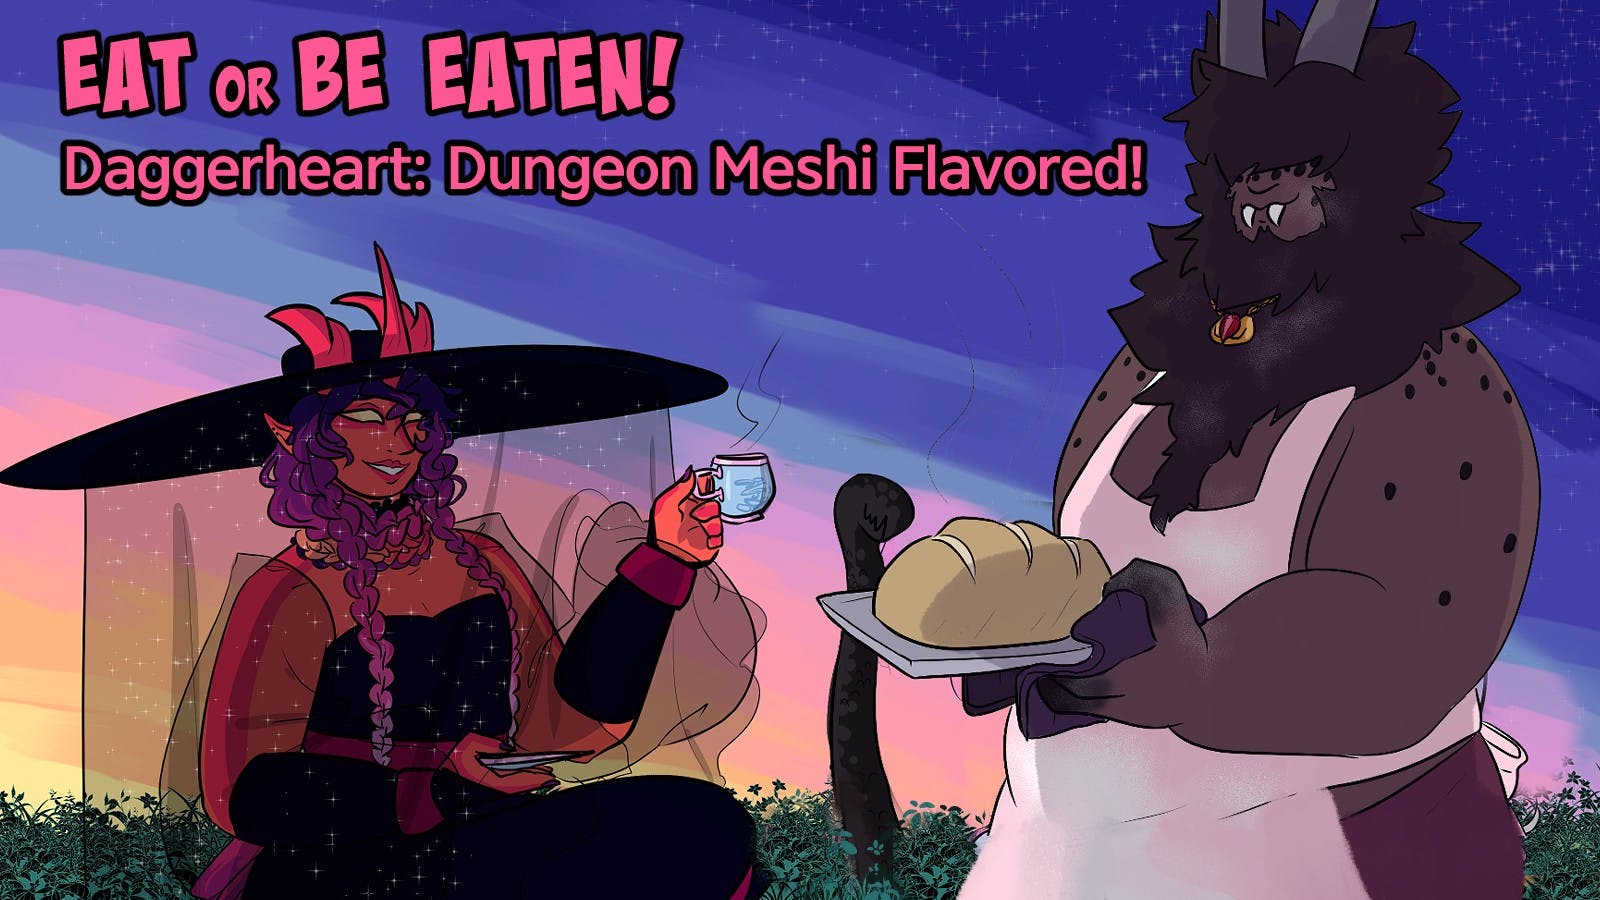 Eat or Be Eaten: Daggerheart Dungeon Meshi flavored! Roleplay heavy, Resource management, Cook up monsters!